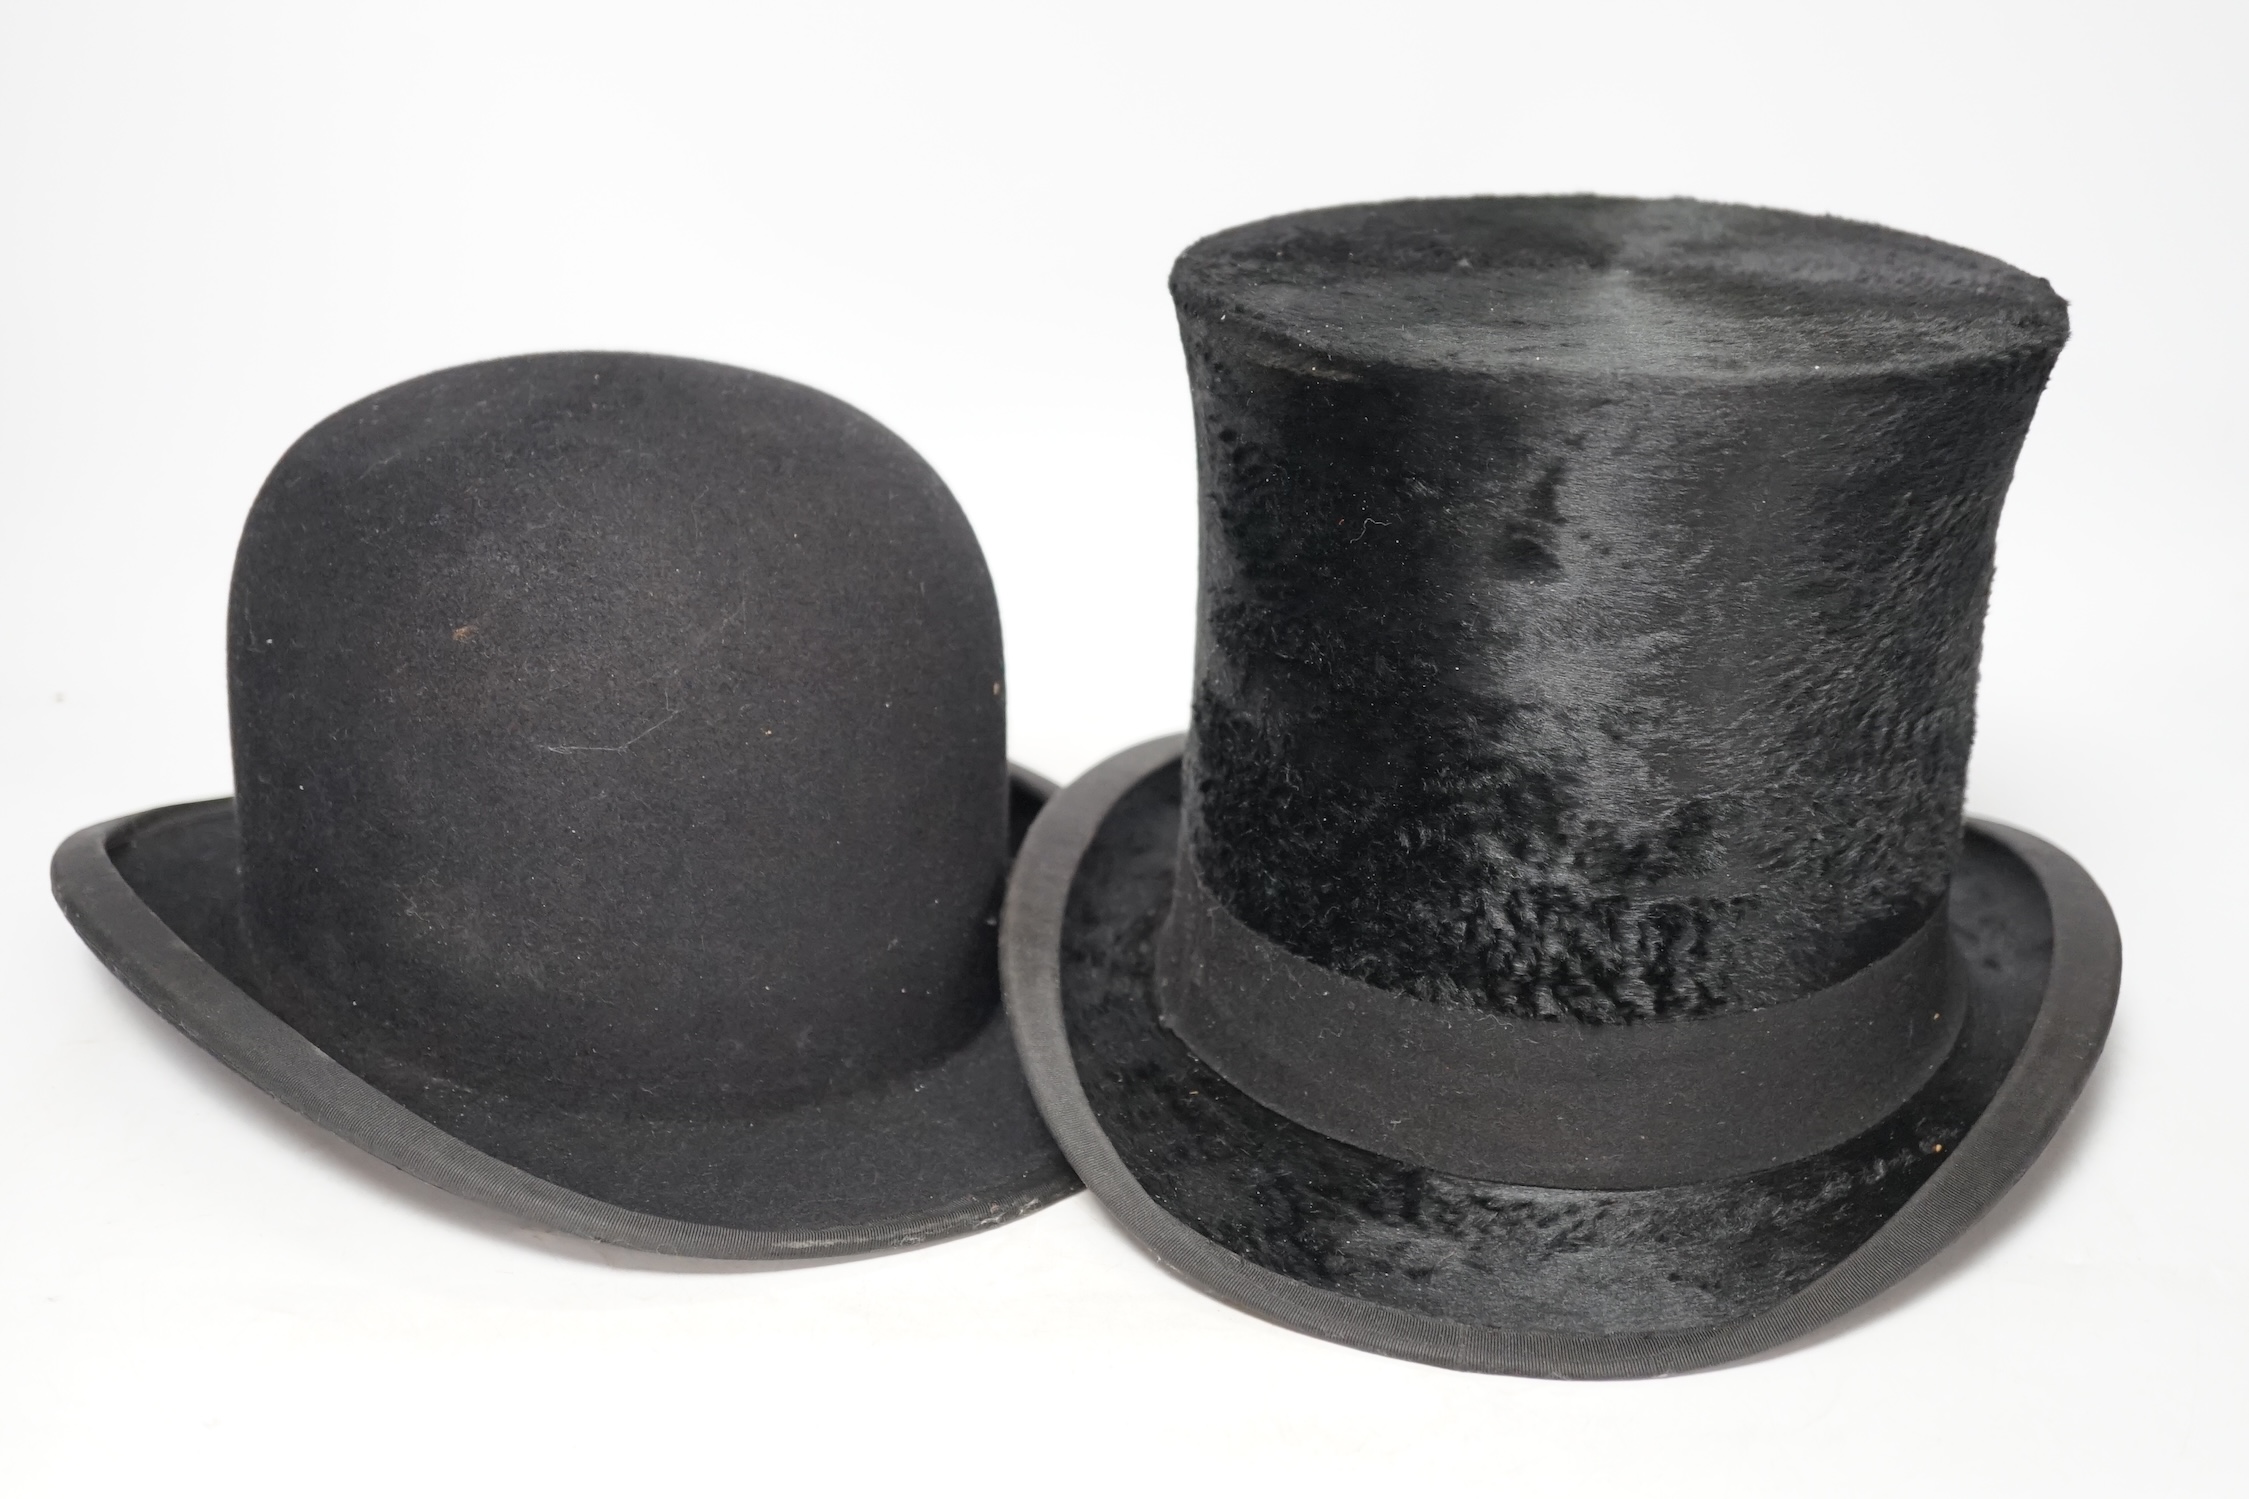 An early 20th century Alfred Townsend, Jermyn St, St James’s black bowler hat and a similar aged black silk top hat, both small sizes. Condition - fair